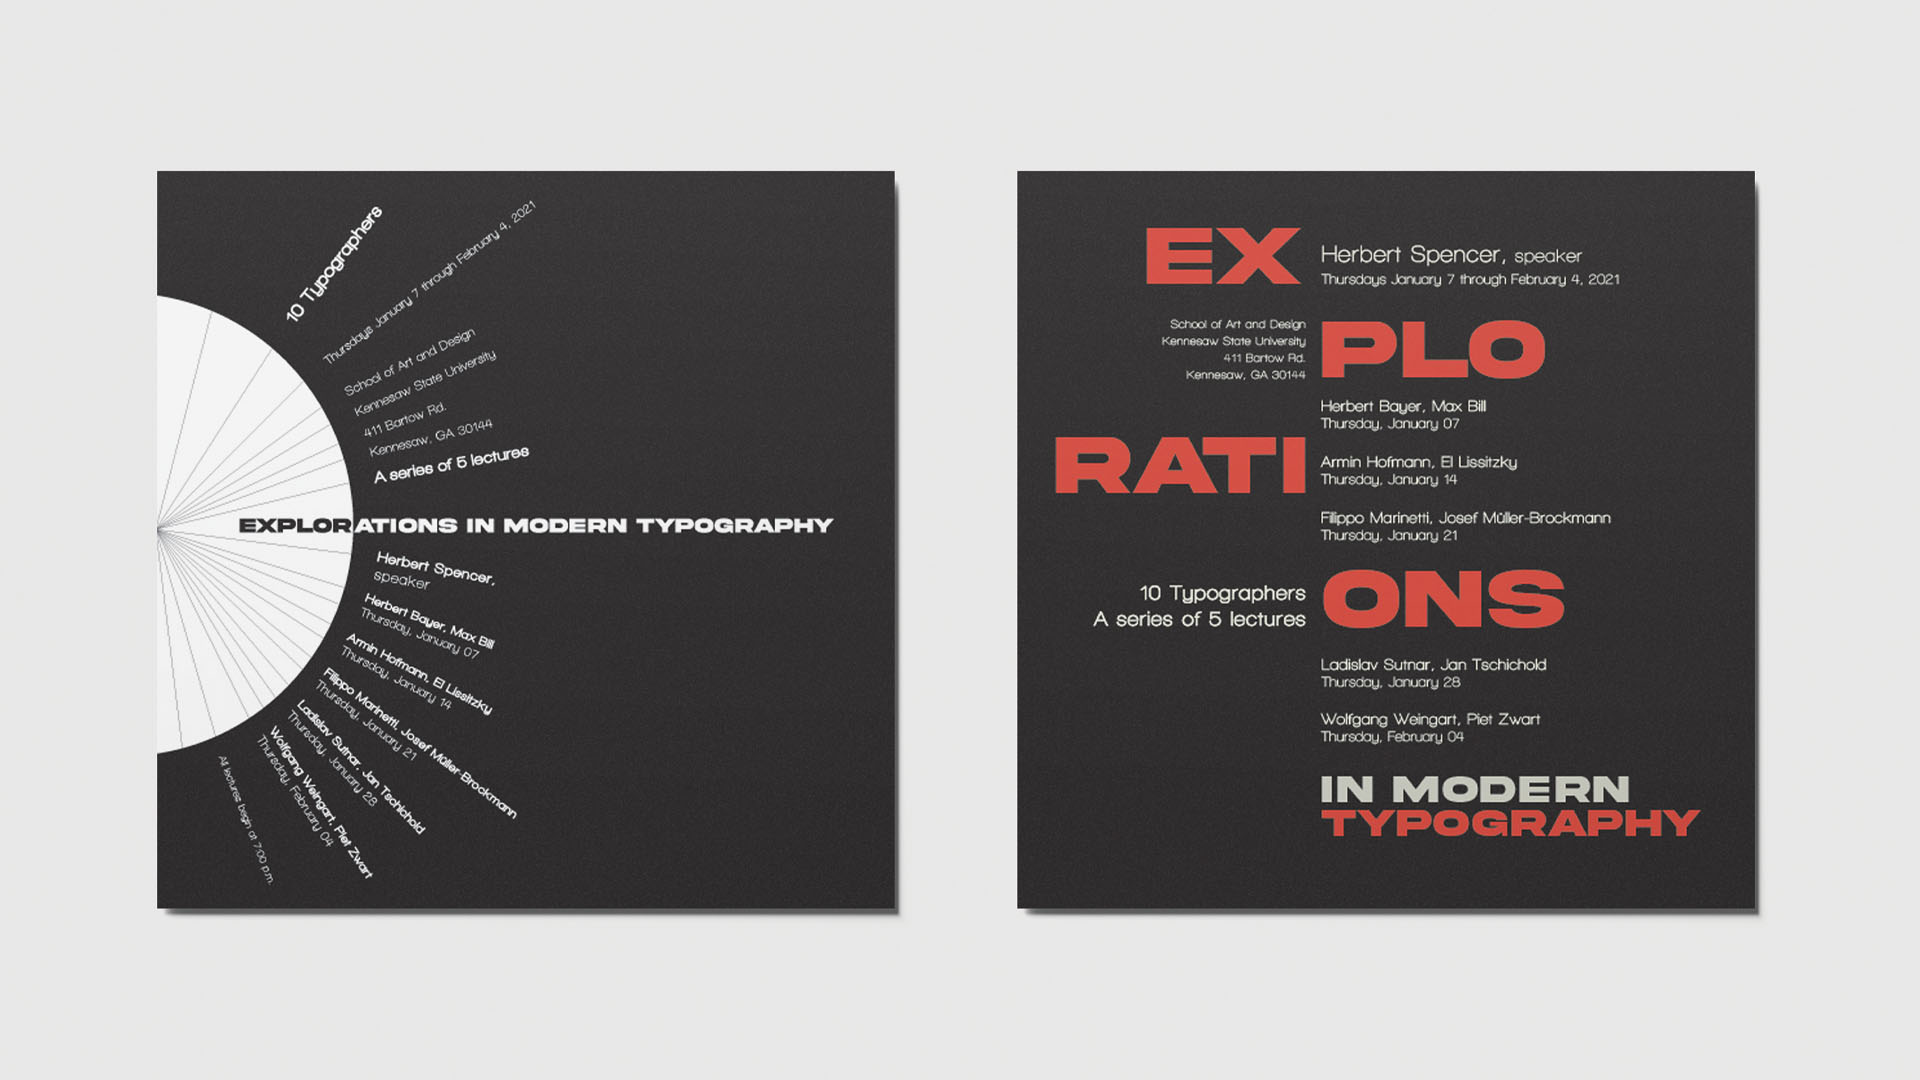  / “Explorations in Modern Typography Posters,” event posters, 8 x 8 inches, 2021. These posters were created following the radial & axial typographic systems. 